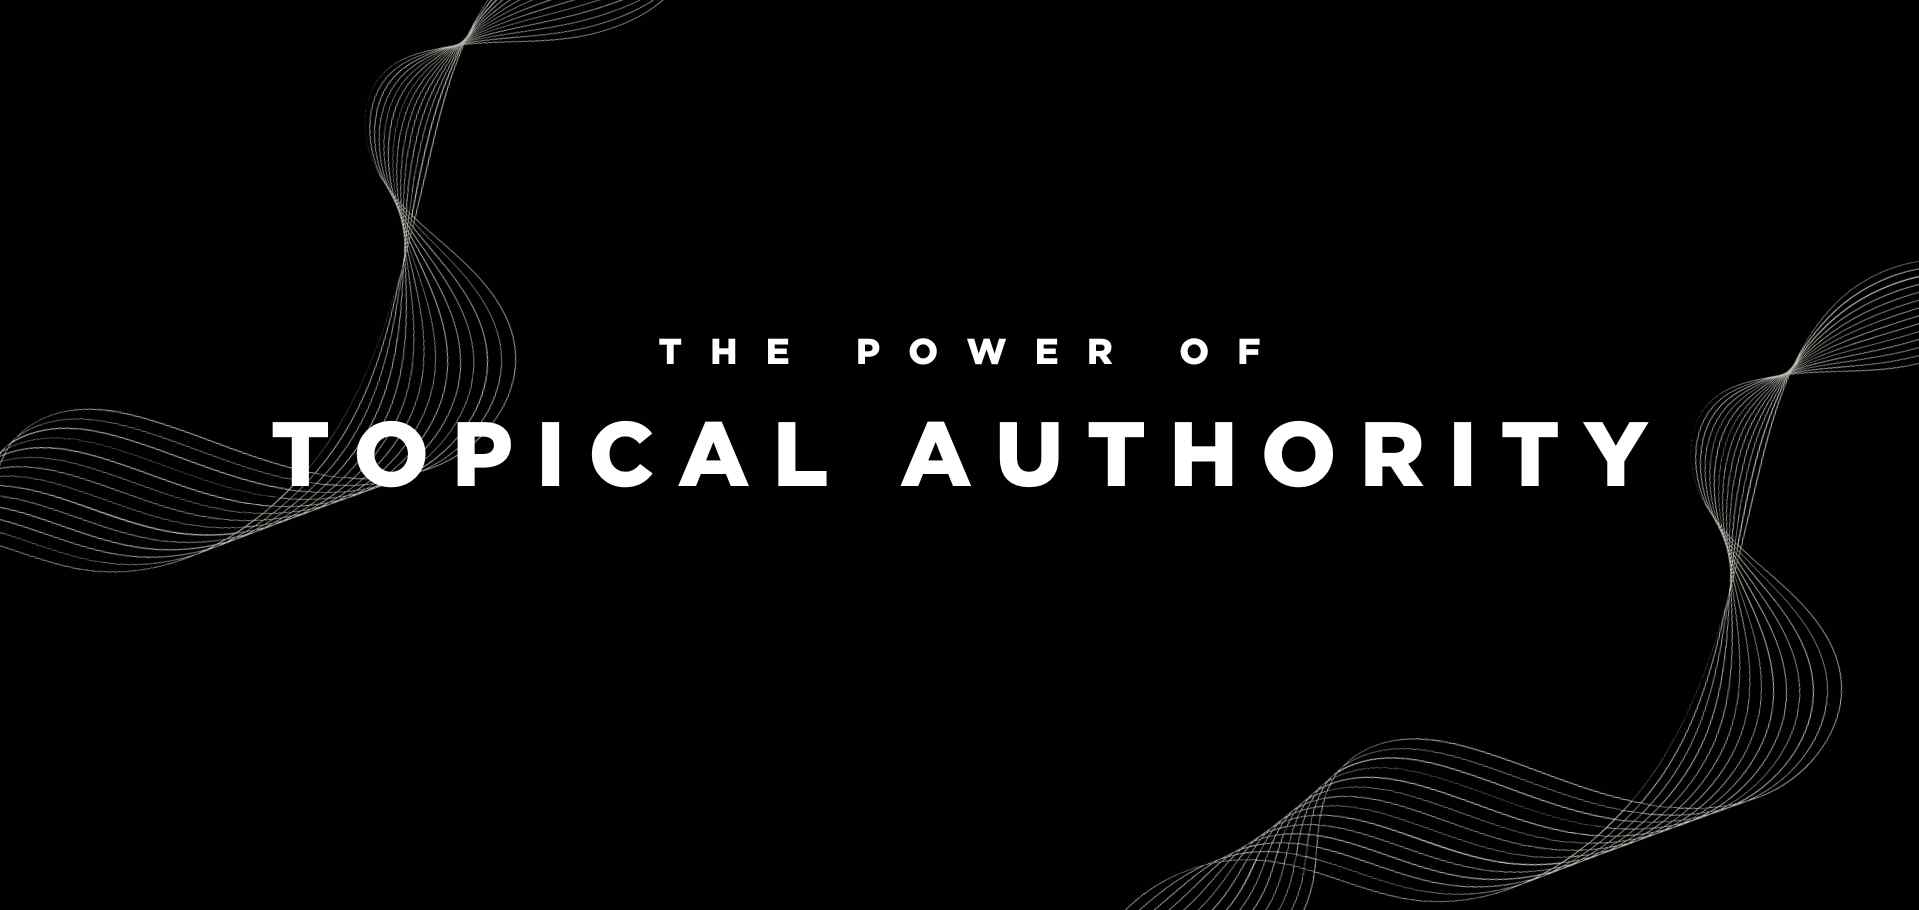 The power of Topical Authority